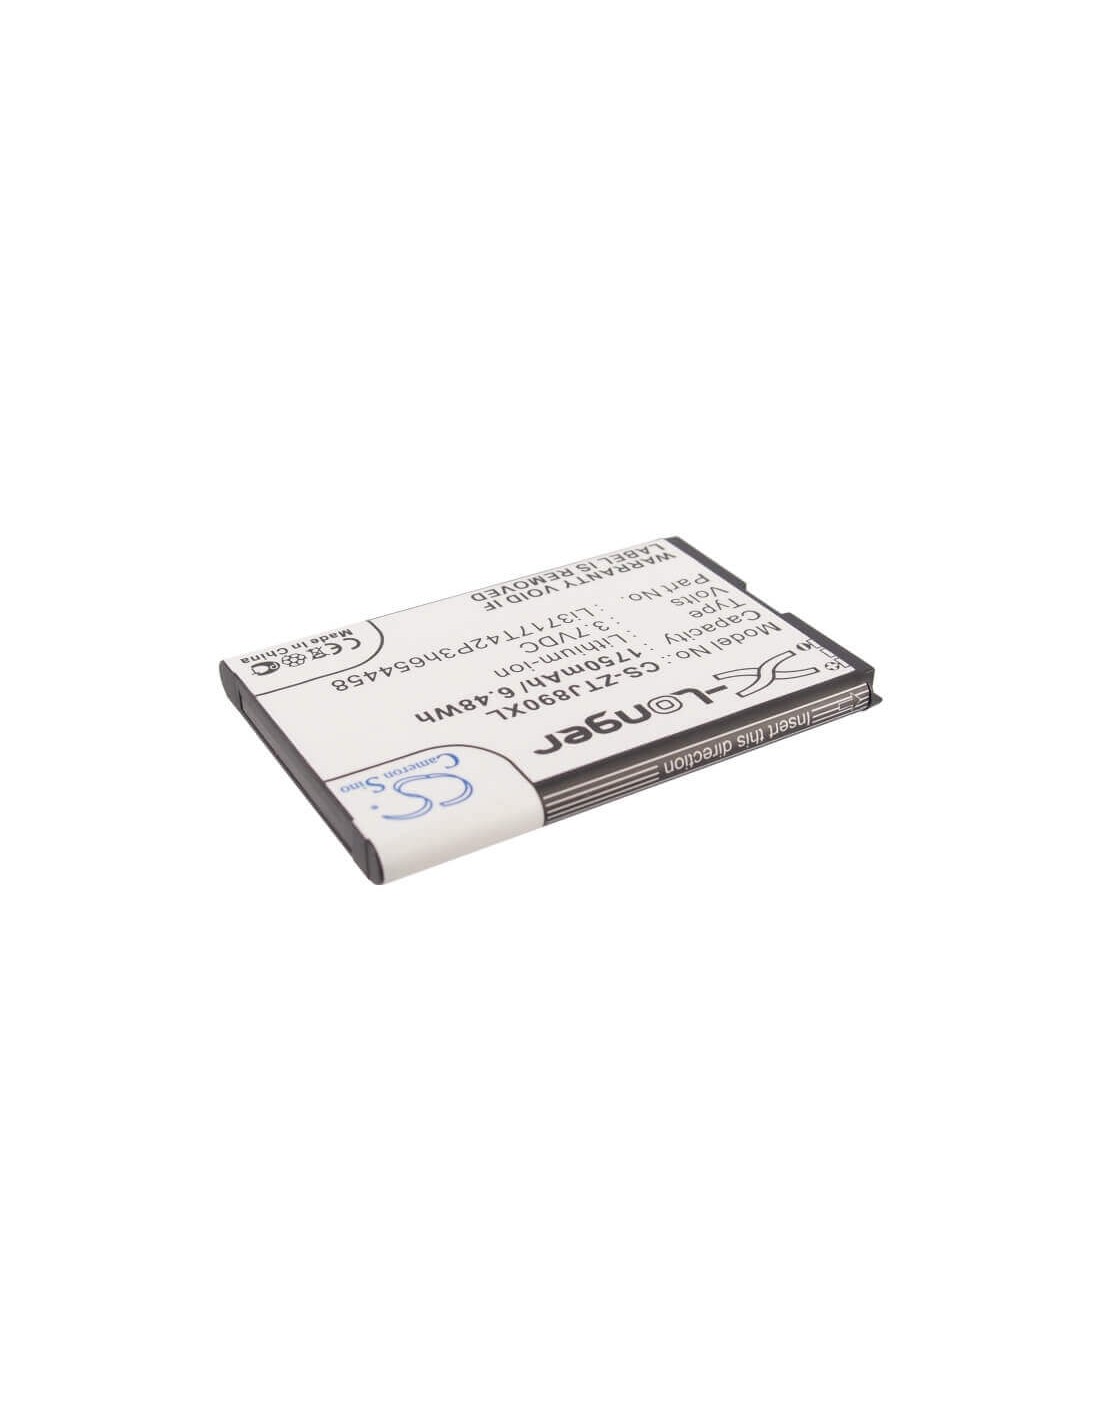 Battery for Zte Authentic, Eufi890, Mf63 3.7V, 1750mAh - 6.48Wh